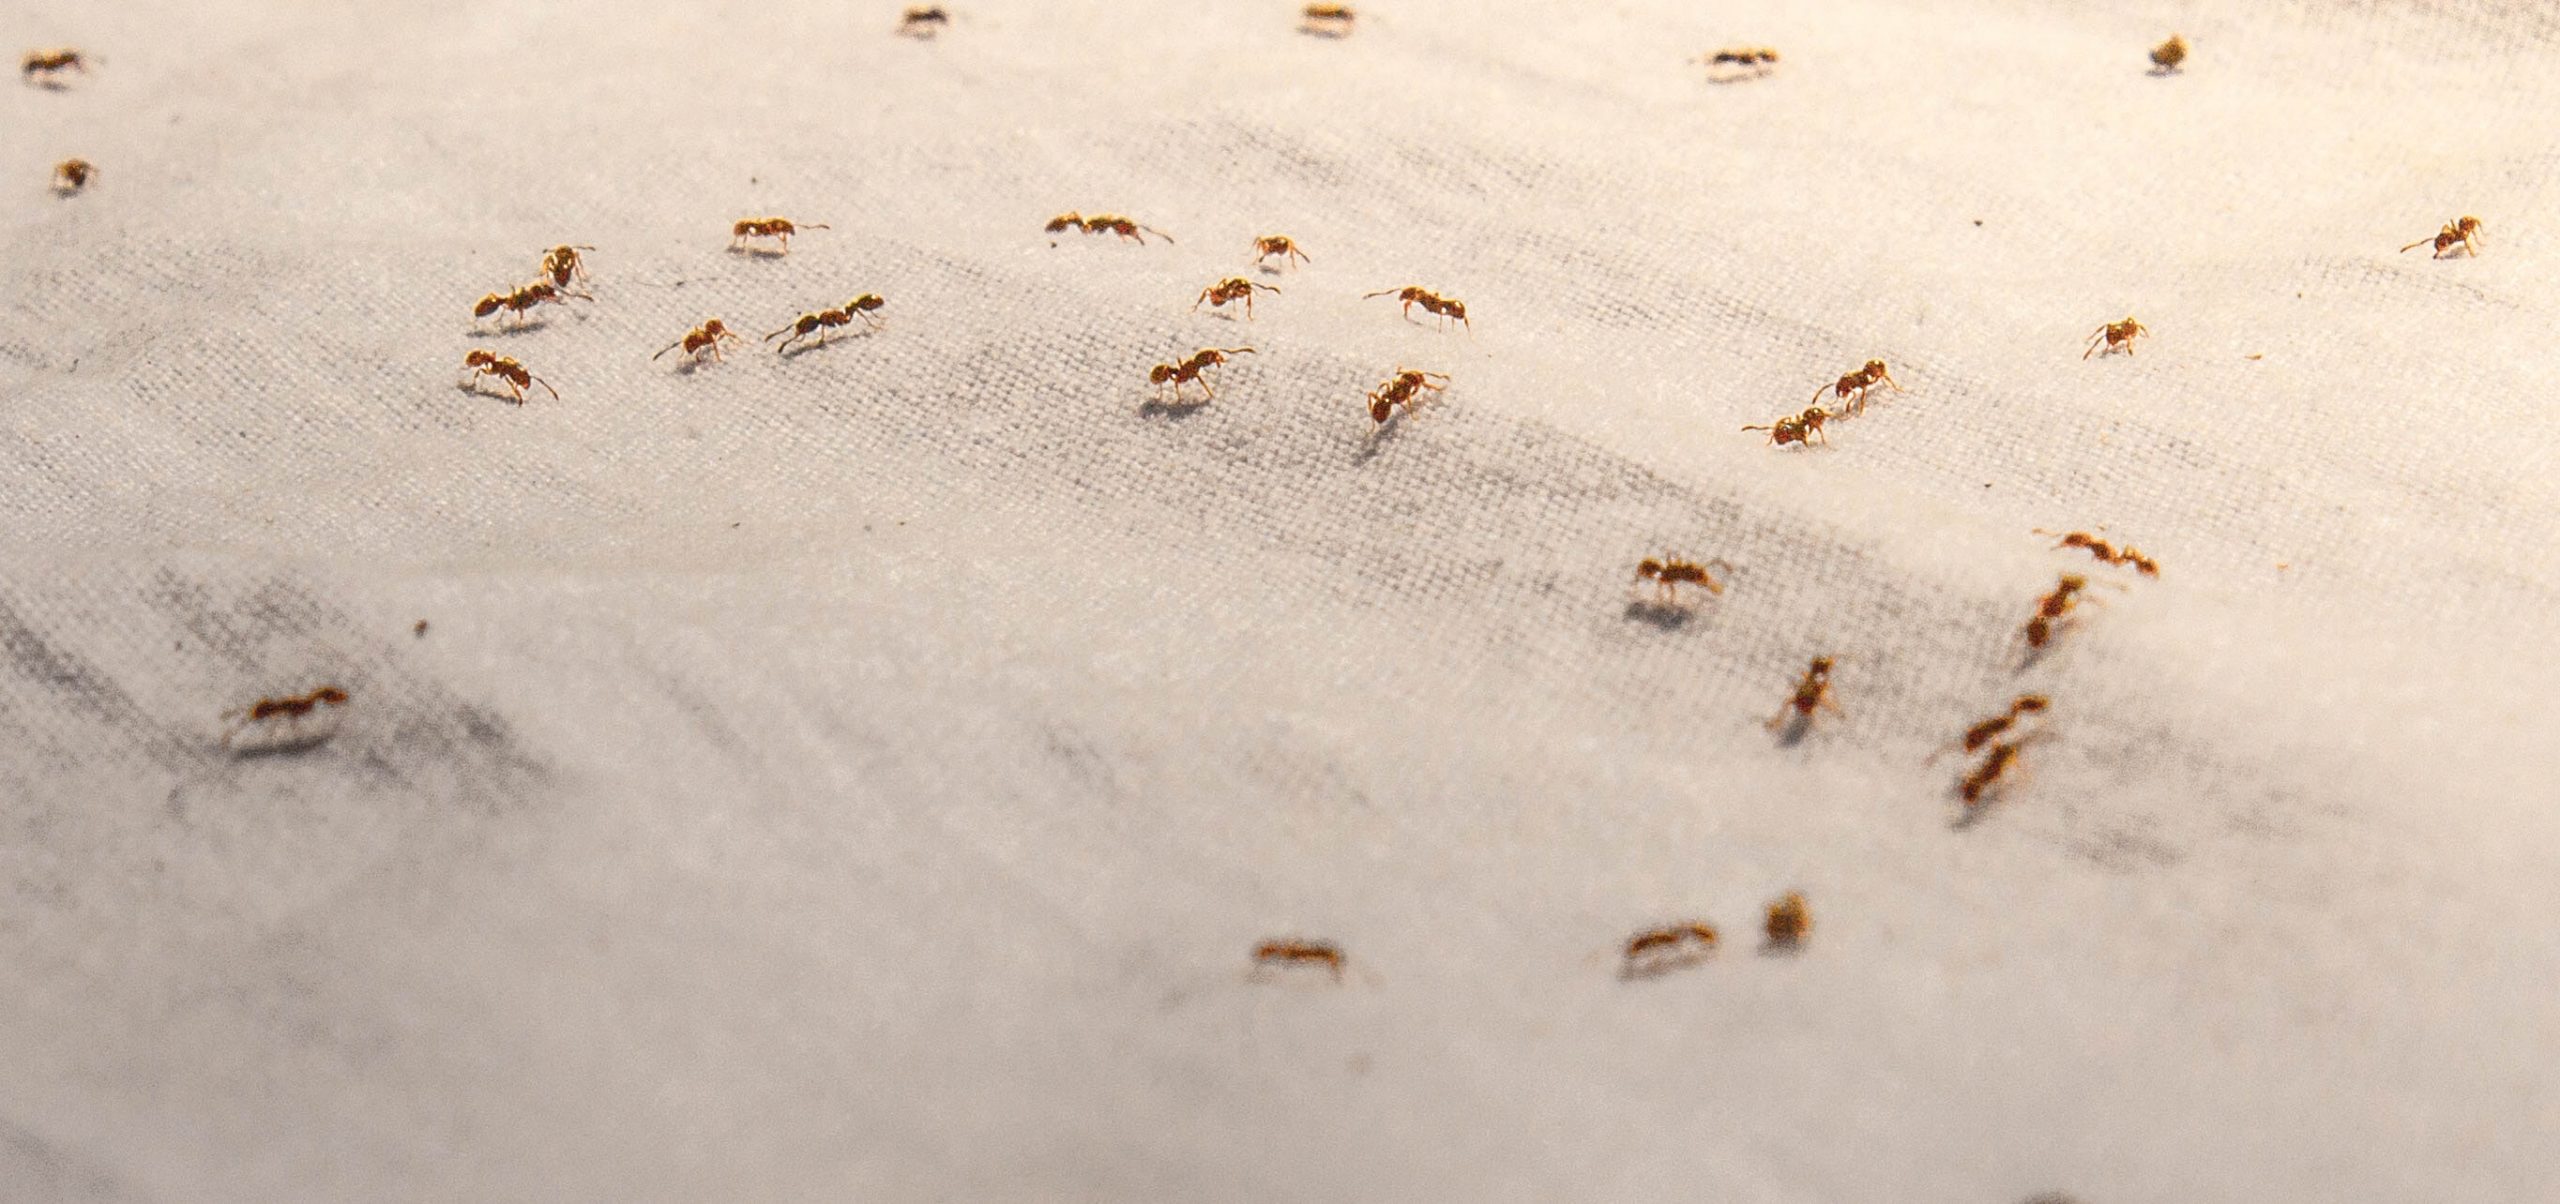 how to get rid of ants in bathroom